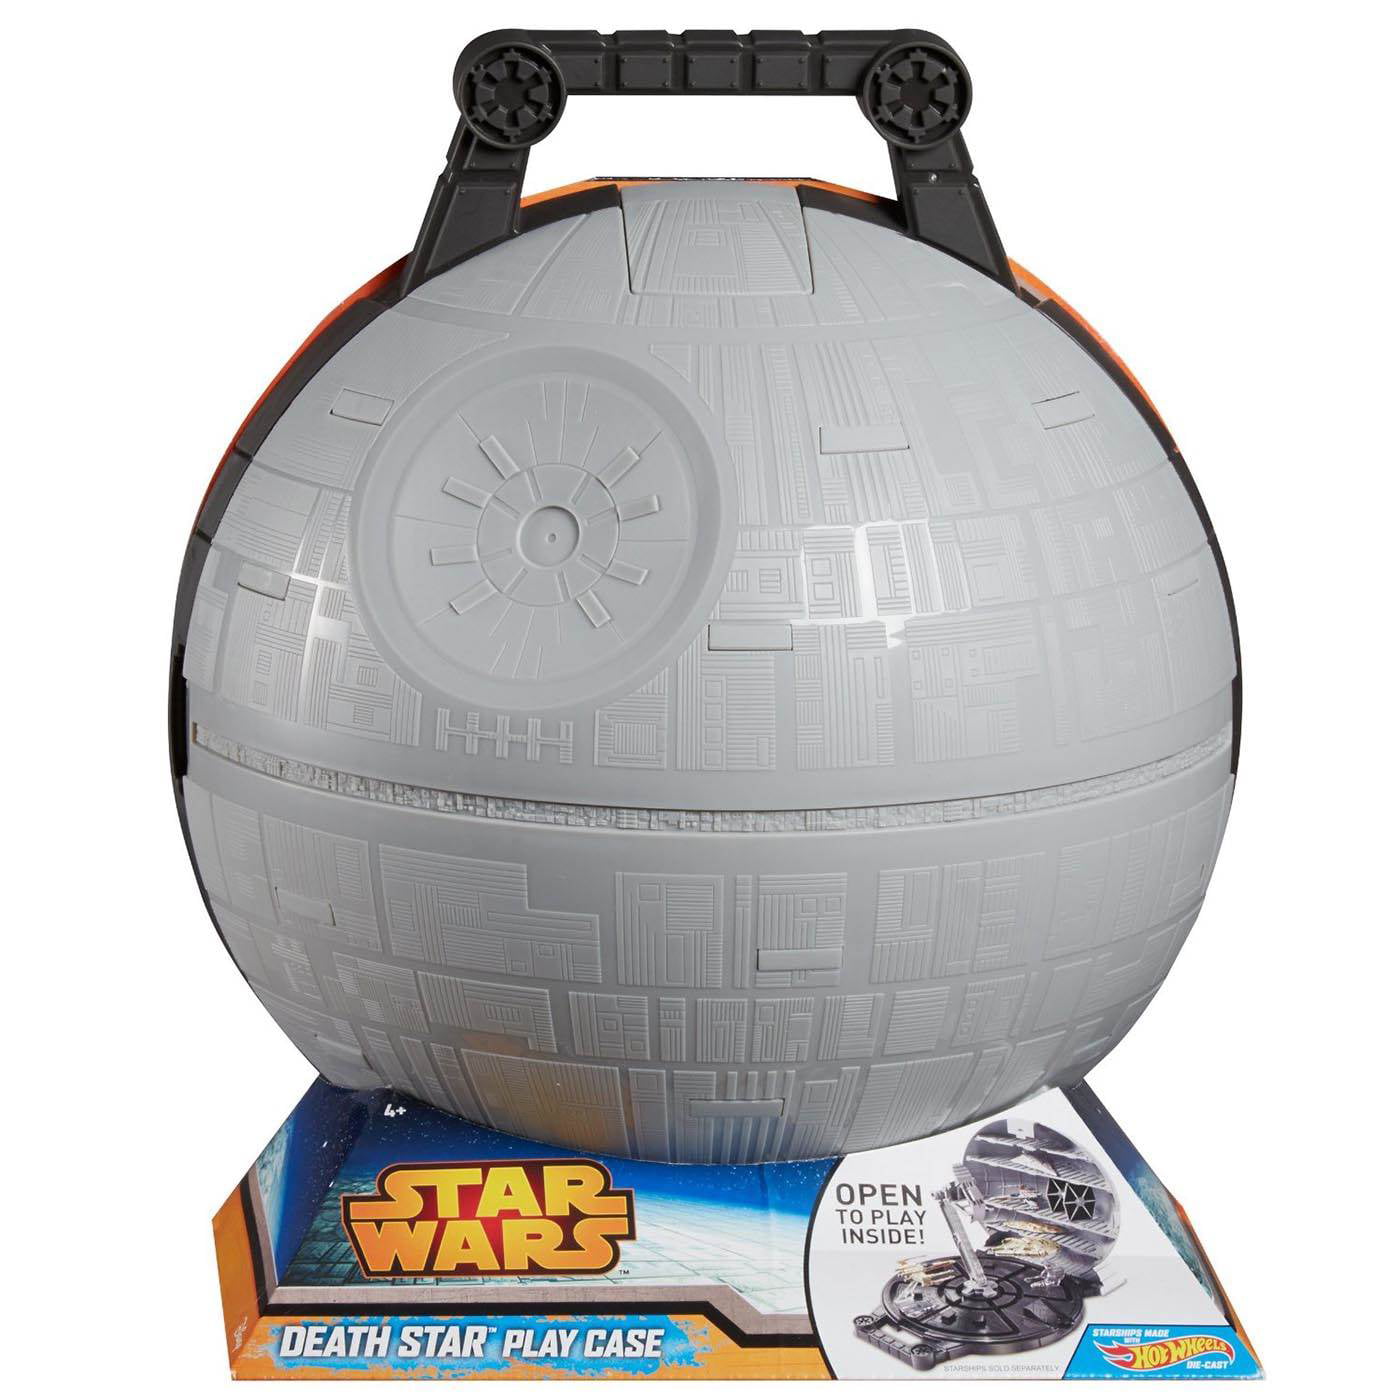 & 4 Star ships Set By Hot Wheels Brand NEW huge Star Wars Death Star Play Case 